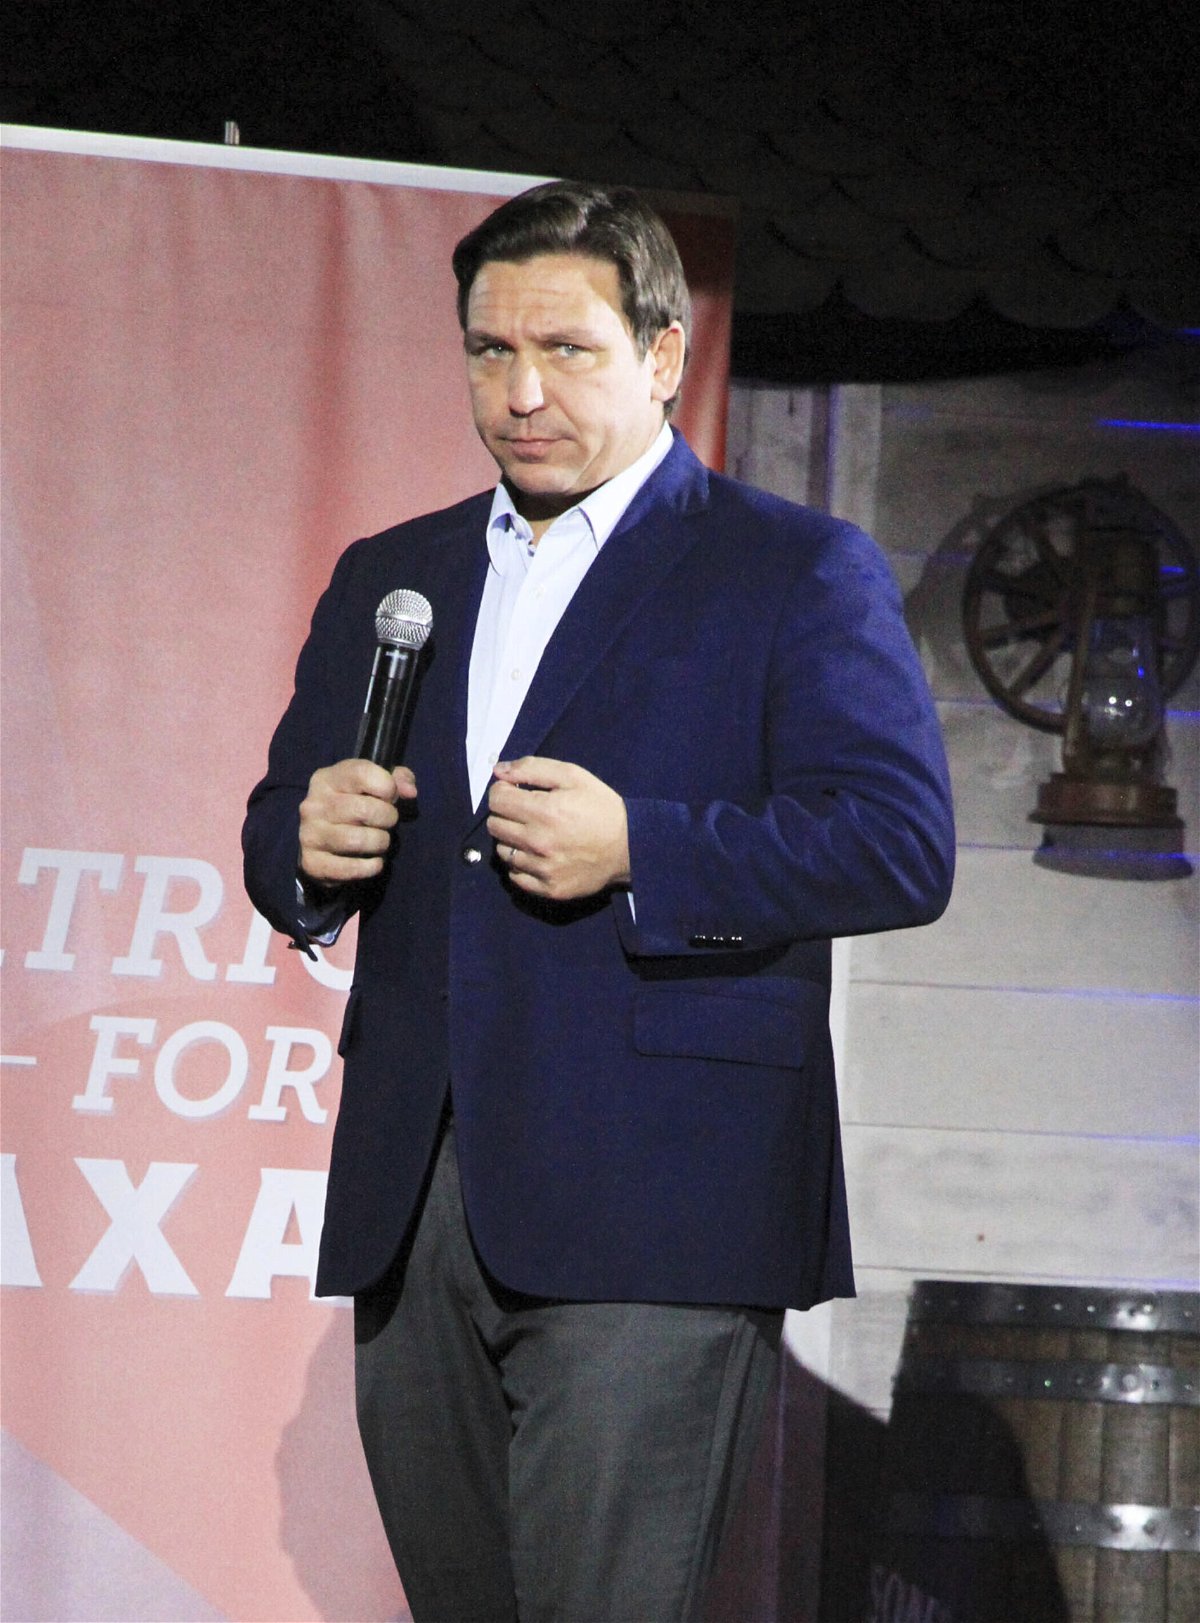 <i>Raoul Gatchalian/STAR MAX/IPx/AP</i><br/>Some Republicans have expressed their unease with the punitive actions Ron DeSantis recently took against the Walt Disney Company. The Florida governor is here attending a campaign event in Las Vegas on April 27.